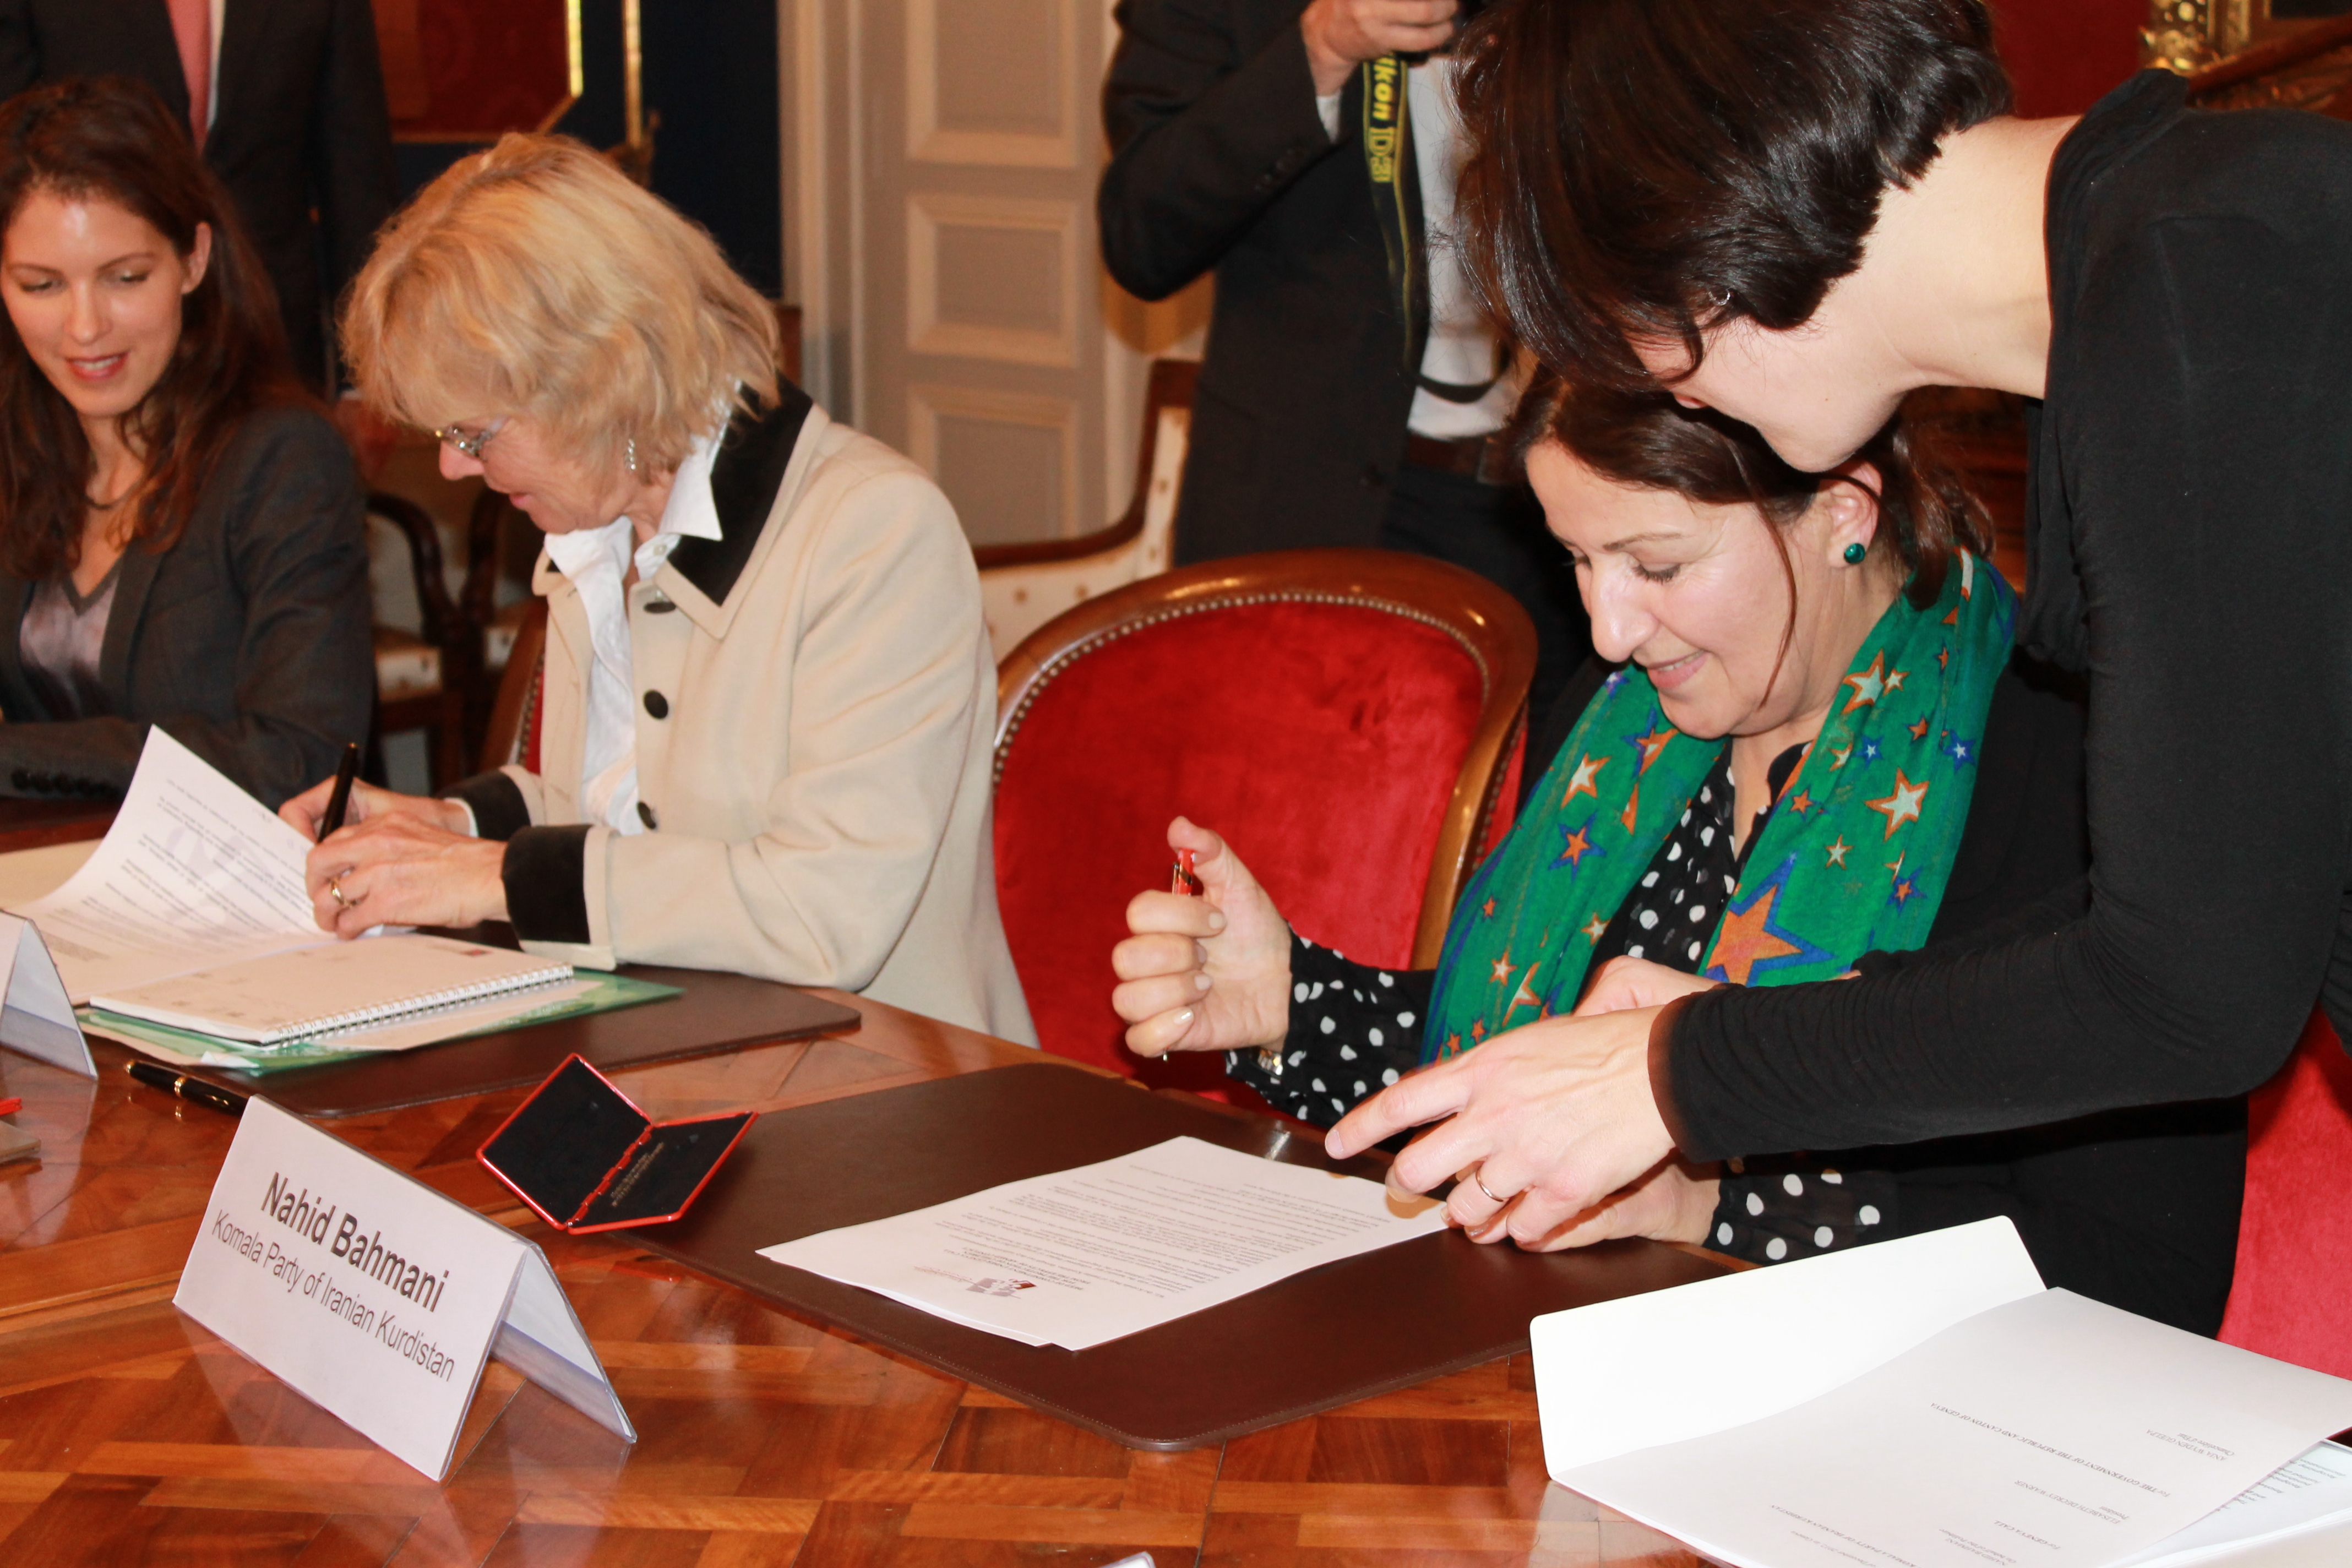 Geneva Call and a representative of the Komala Party of Iranian Kurdistan signing the Deed of Commitment prohibiting sexual violence and gender discrimination